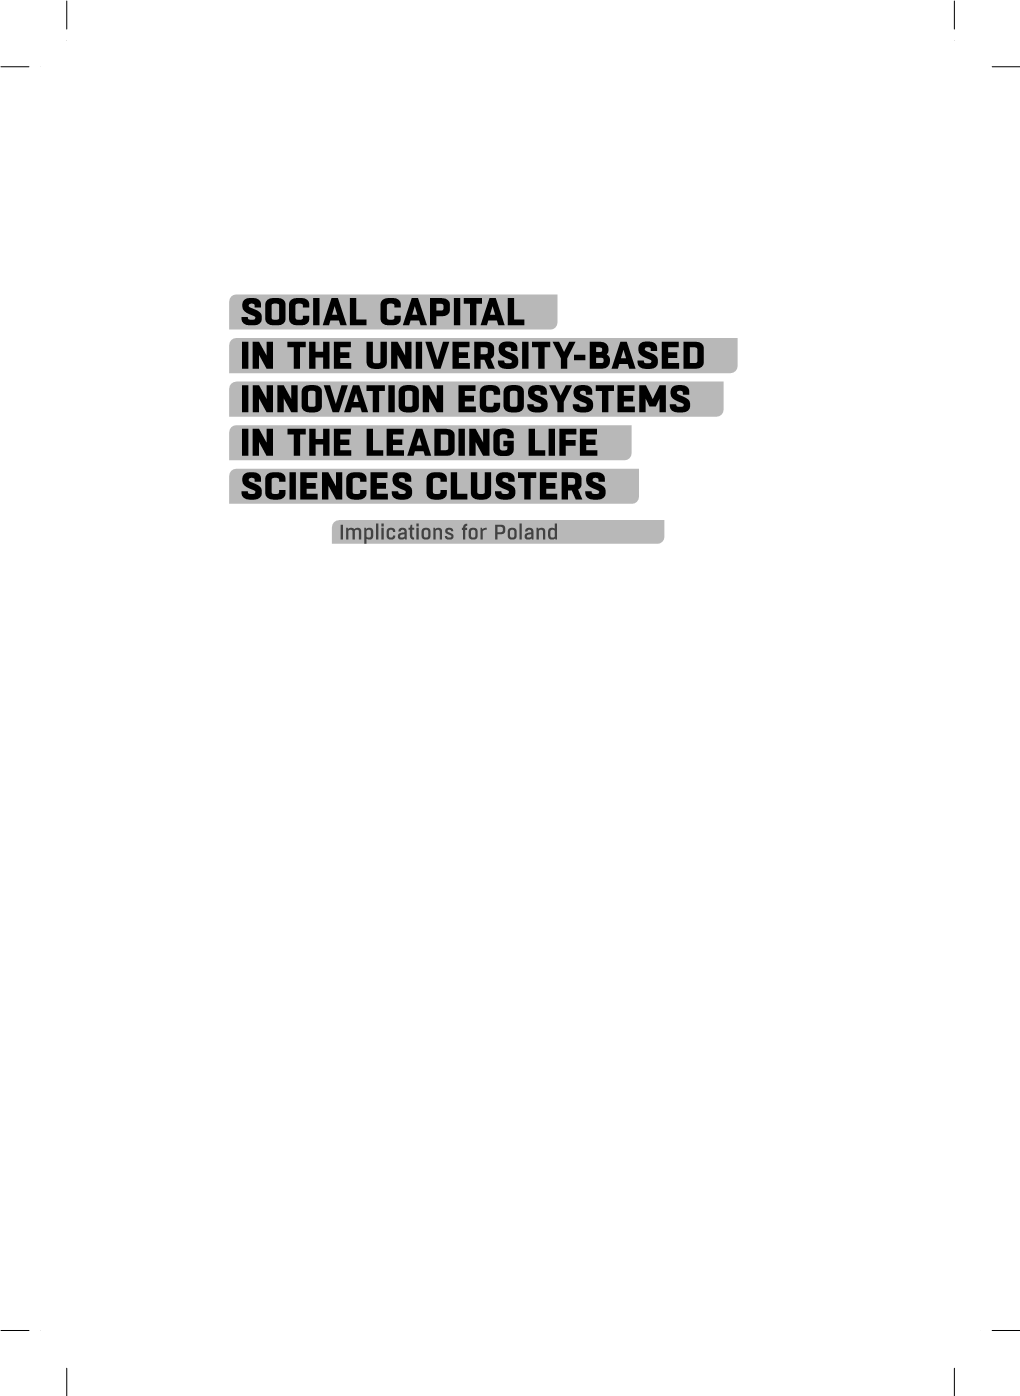 Social Capital in the University-Based Innovation Ecosystems in the Leading Life Sciences Clusters